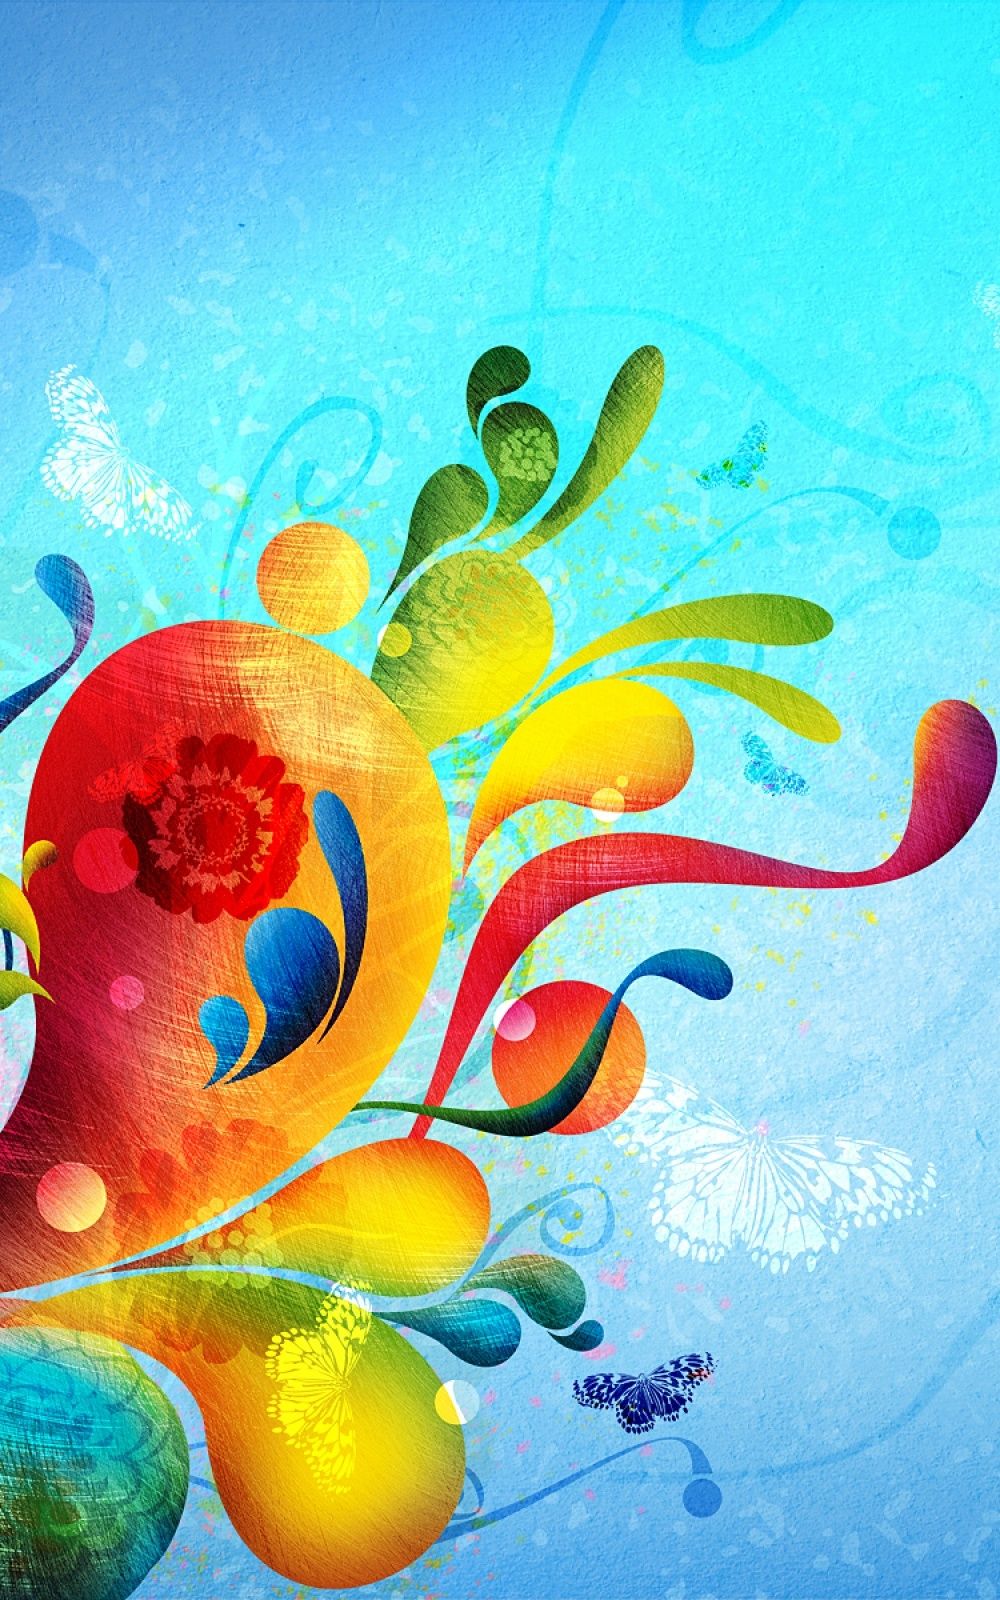 Abstract Colorful Painting Android Wallpaper free download